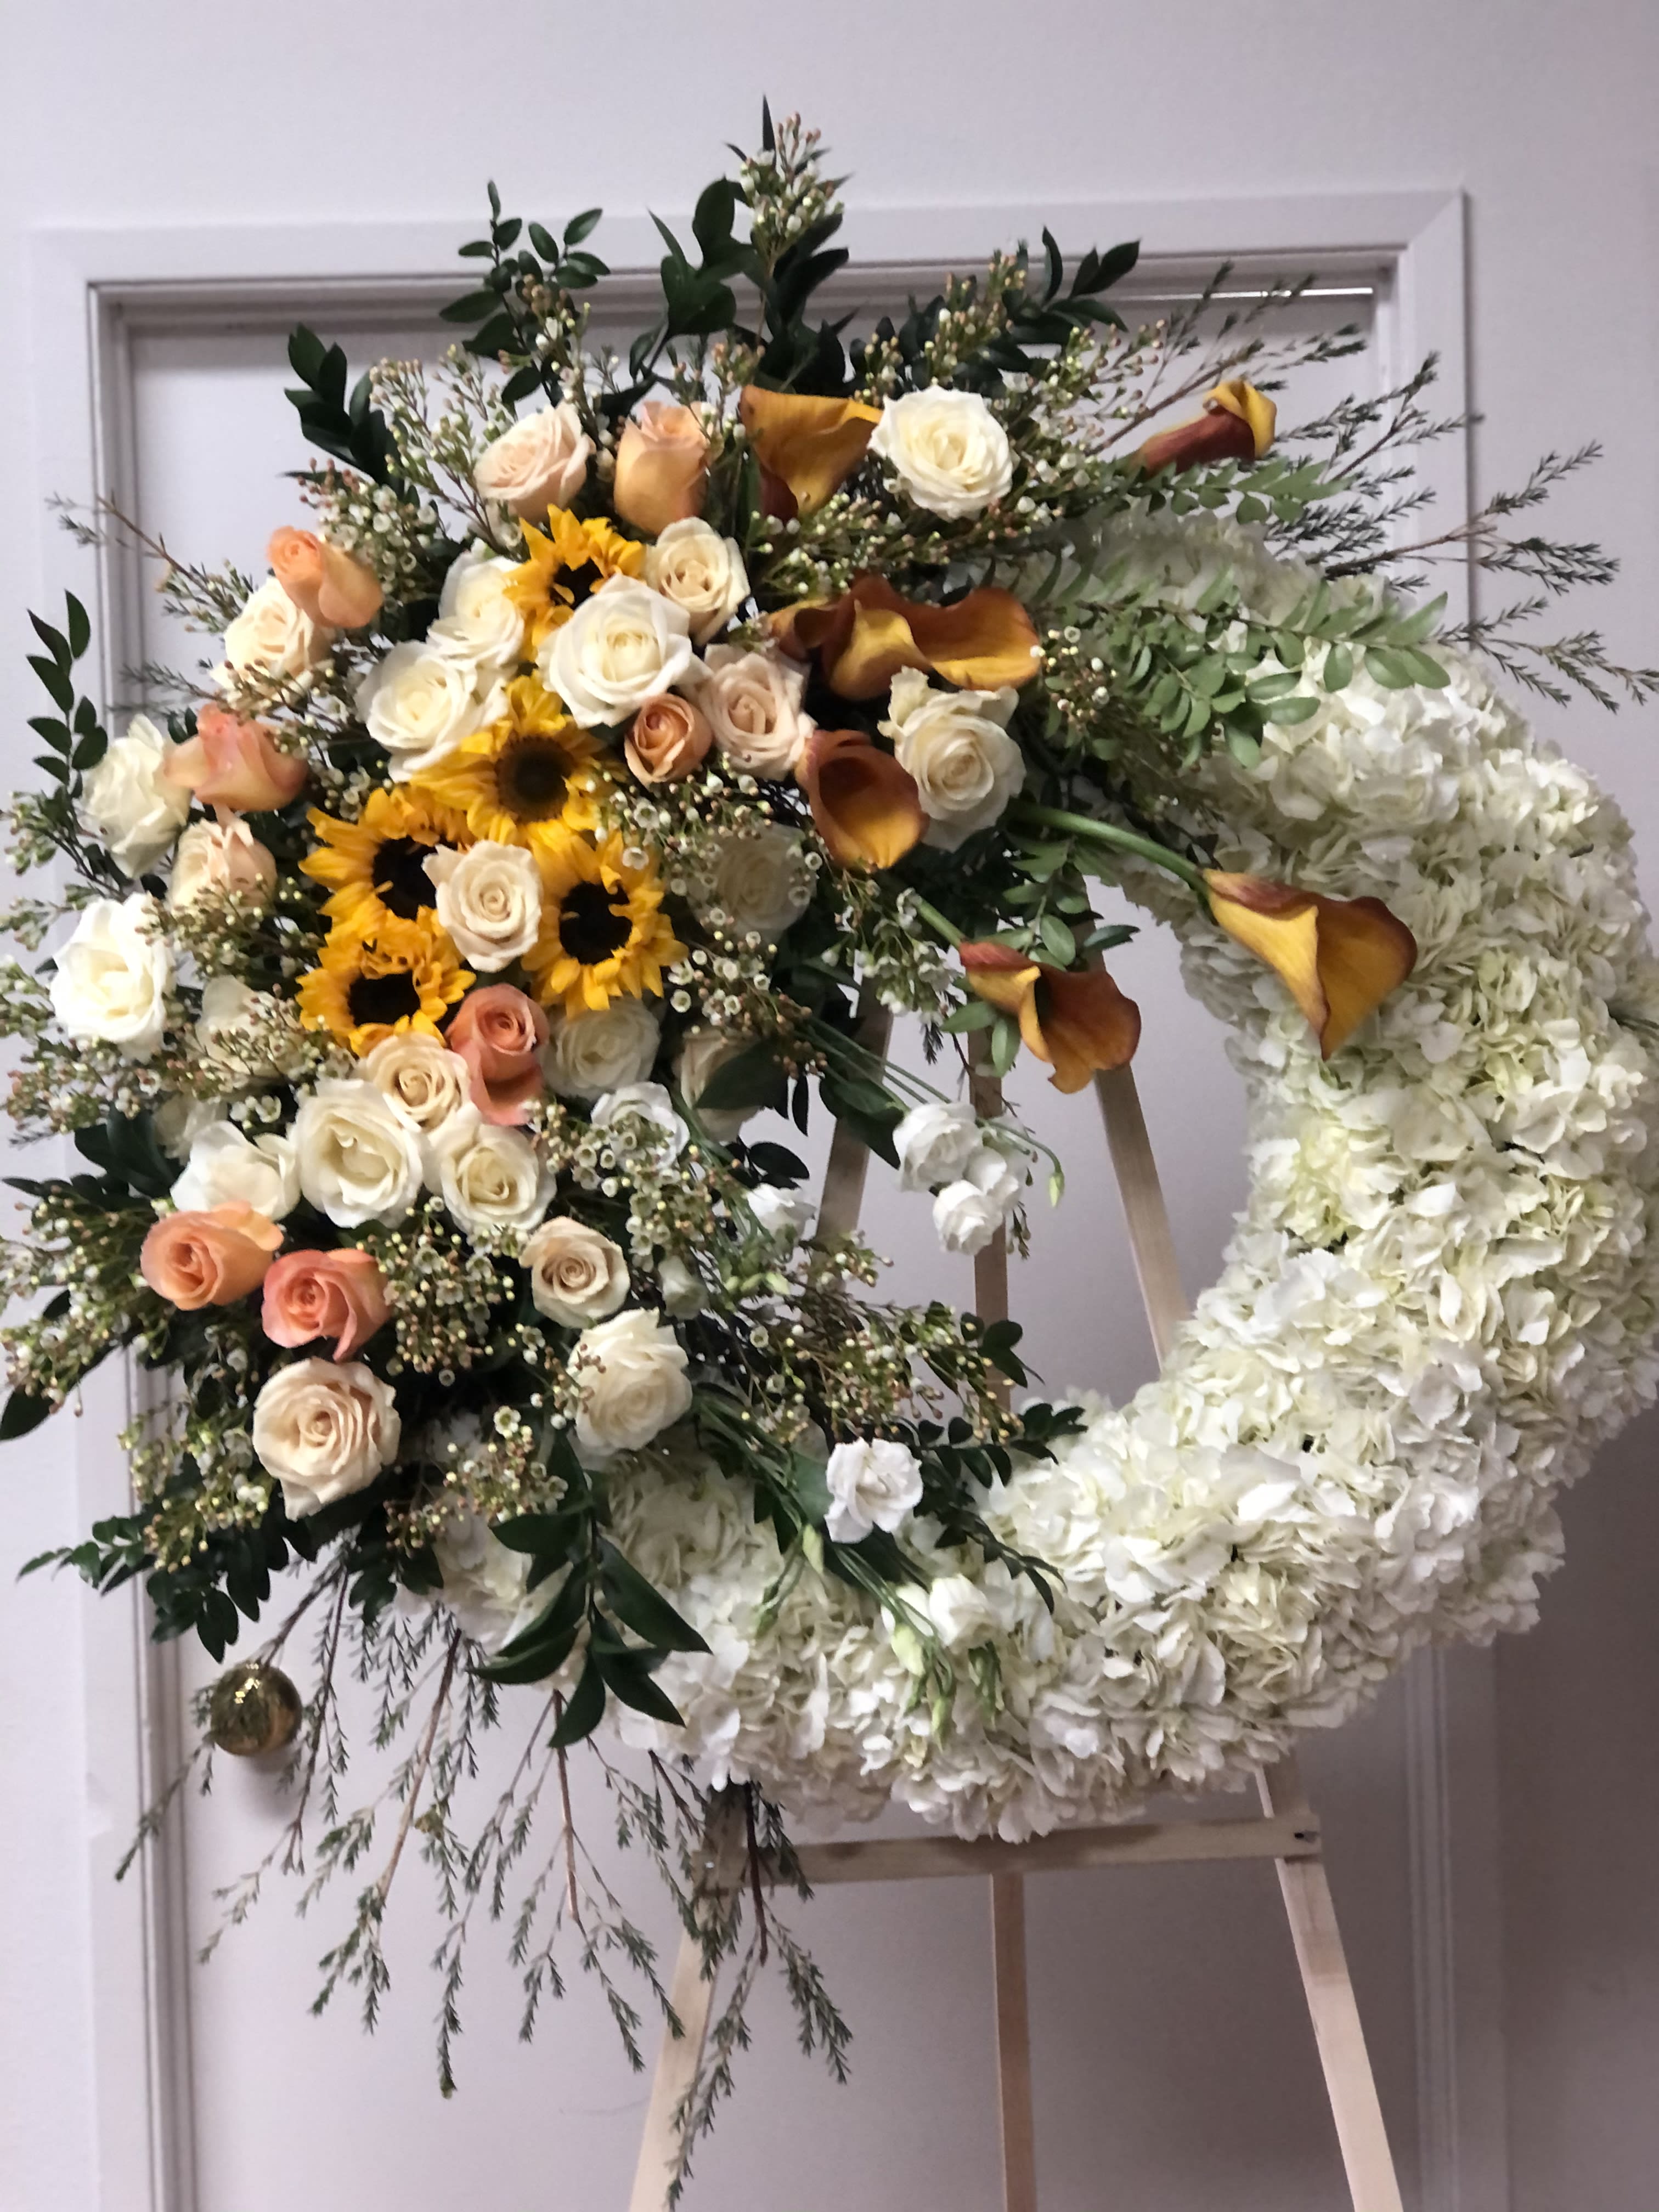 Funeral 3 - White wreath with orange and yellow flowers cascading on one side.